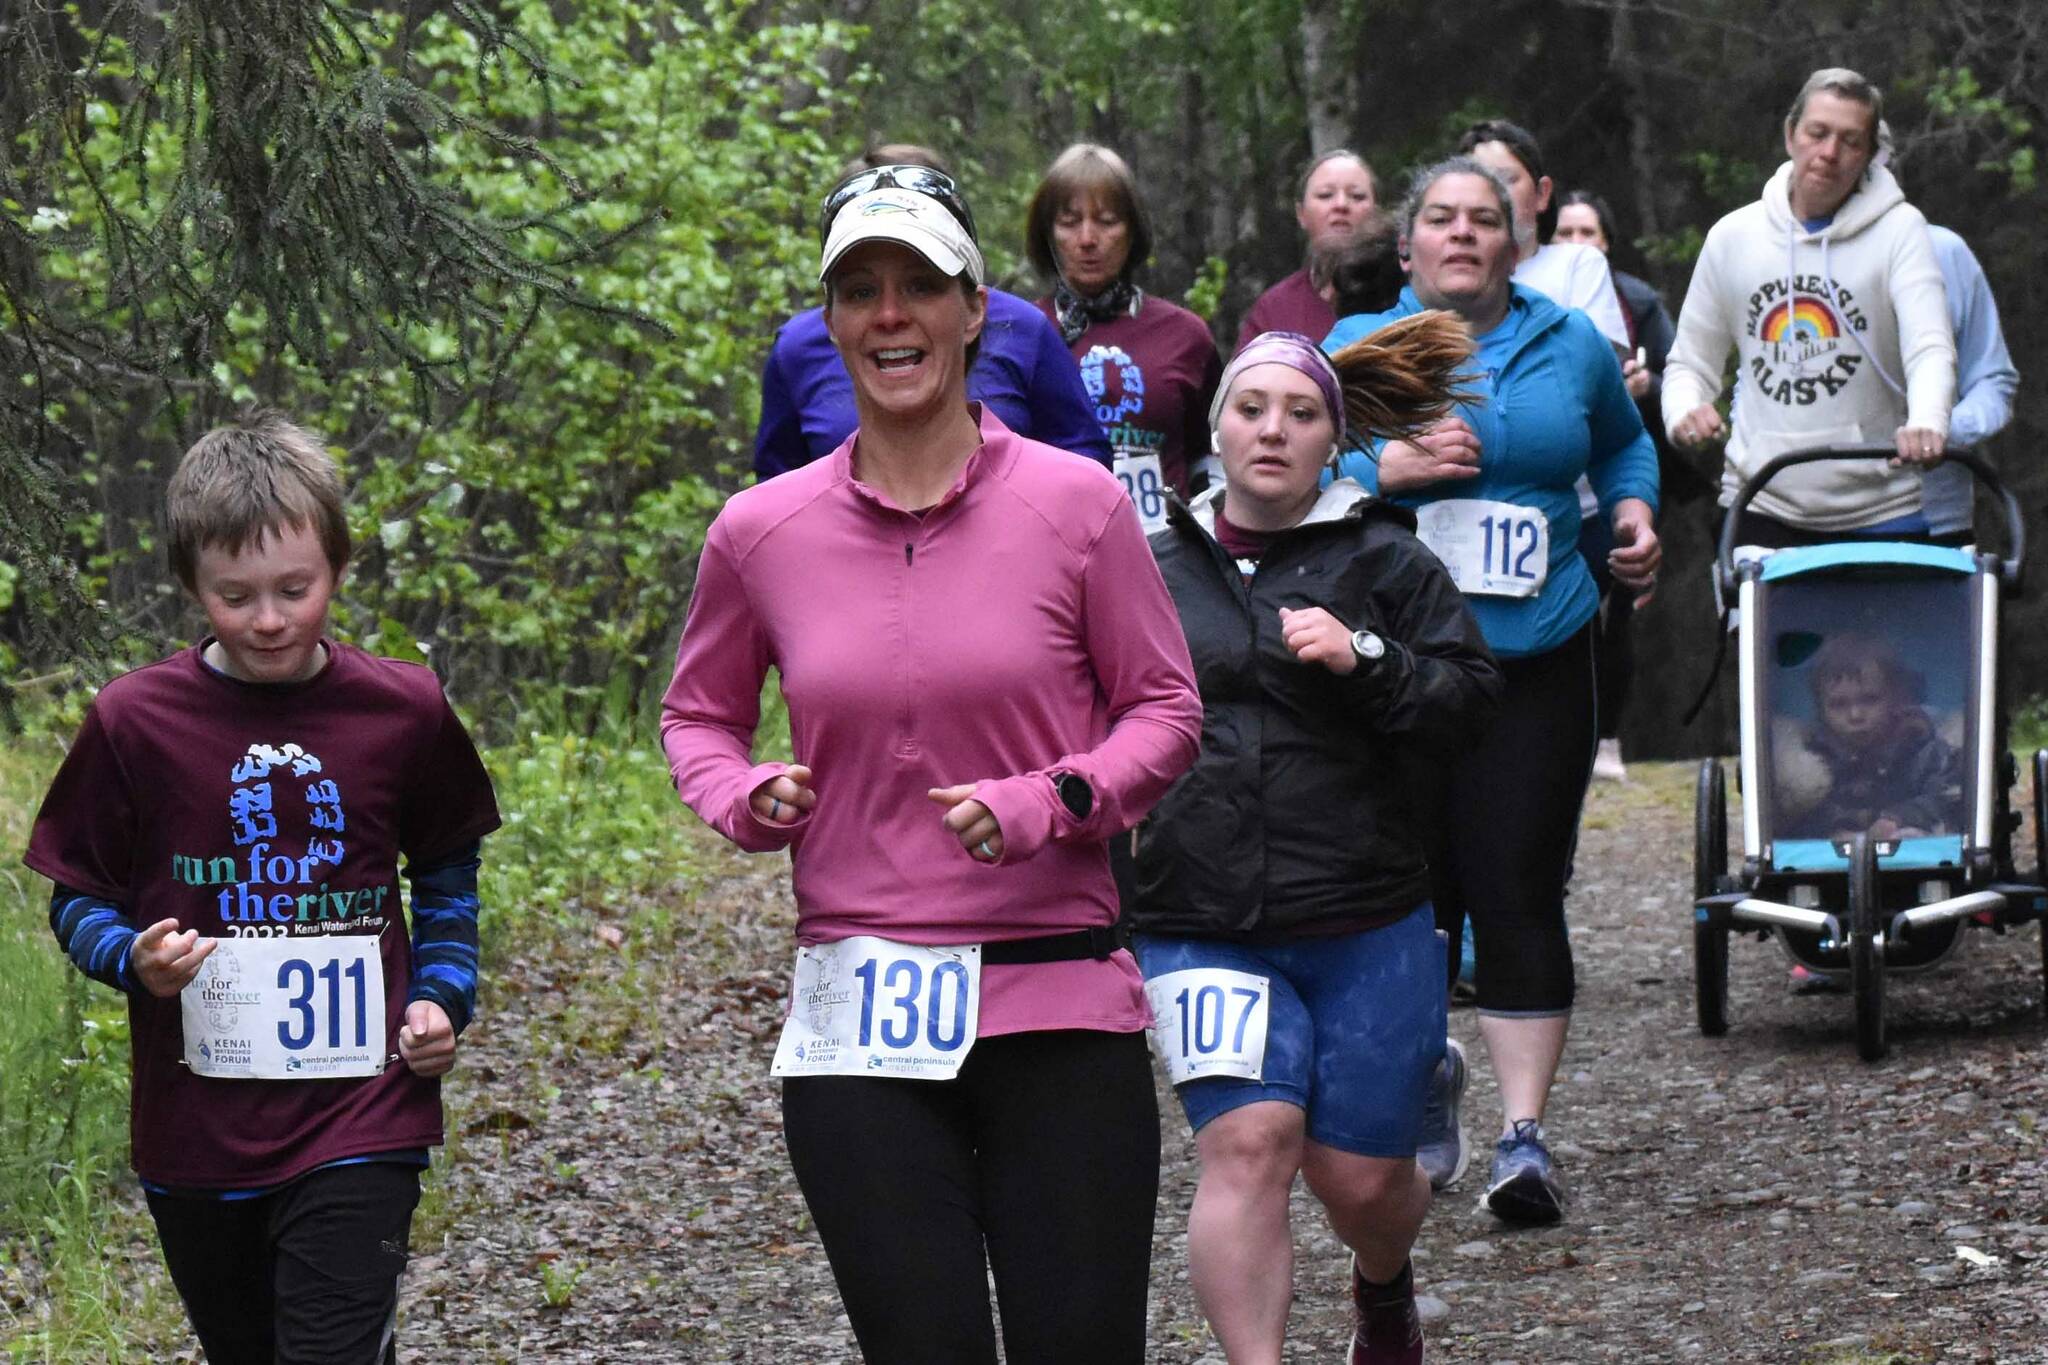 Conner Morris and Kylie Morris lead a pack of runners at the Run for the River on Saturday, June 10, 2023, in Soldotna, Alaska. (Photo by Jeff Helminiak/Peninsula Clarion)